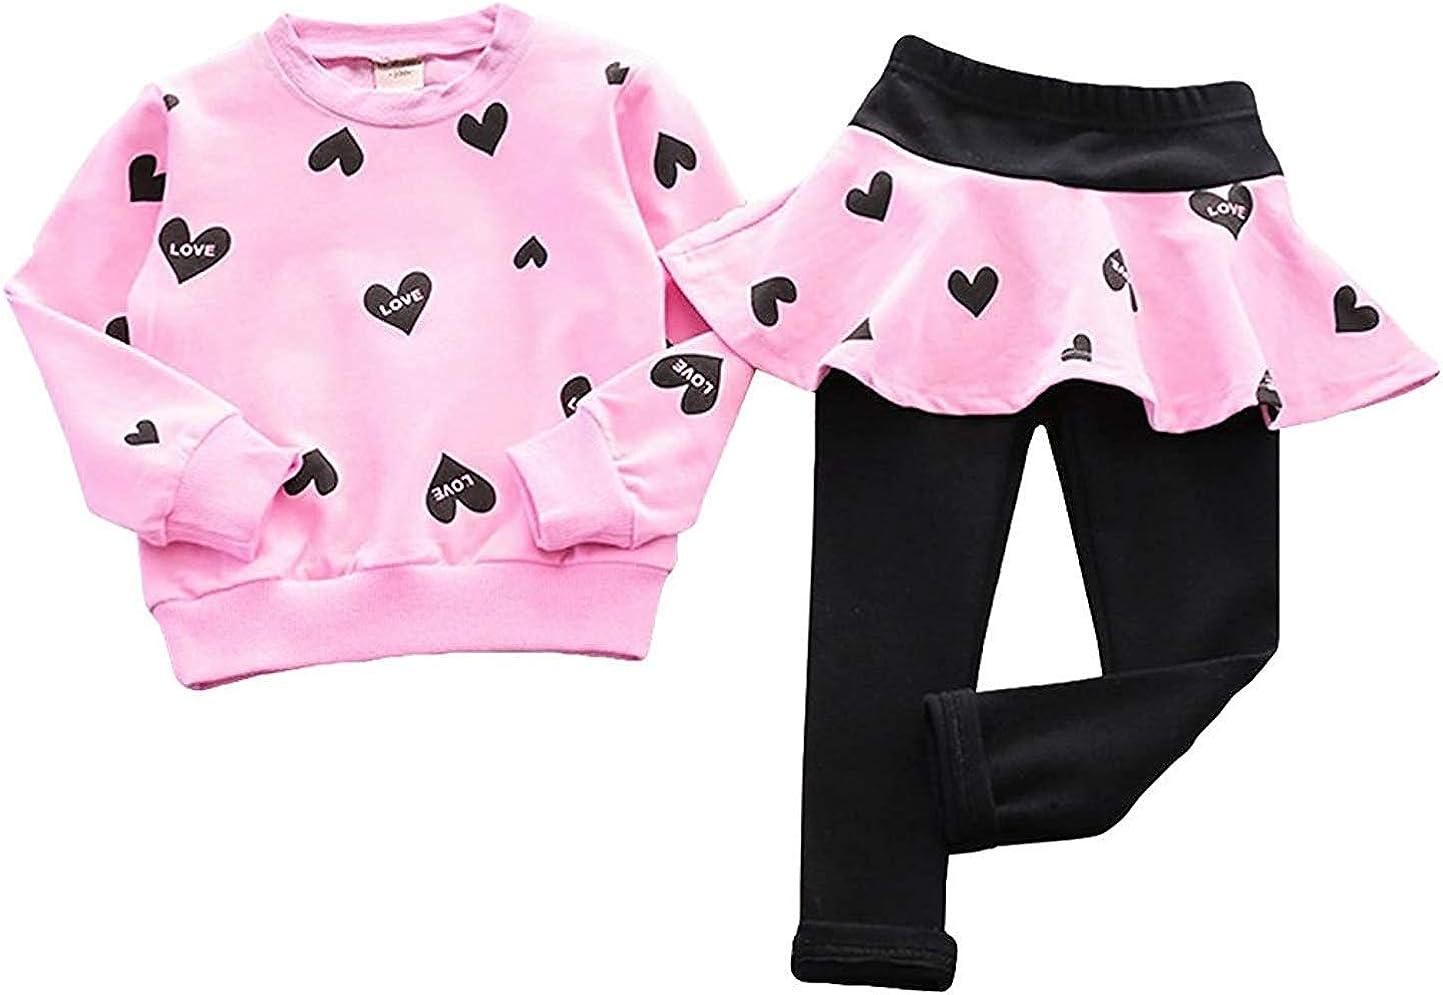 Little Girls Outfits Clothes Toddler Long Sleeve Heart Print Hoodie Shirts  Top + Leggings Kids Clothing Set 5-6 Years 1# Pink